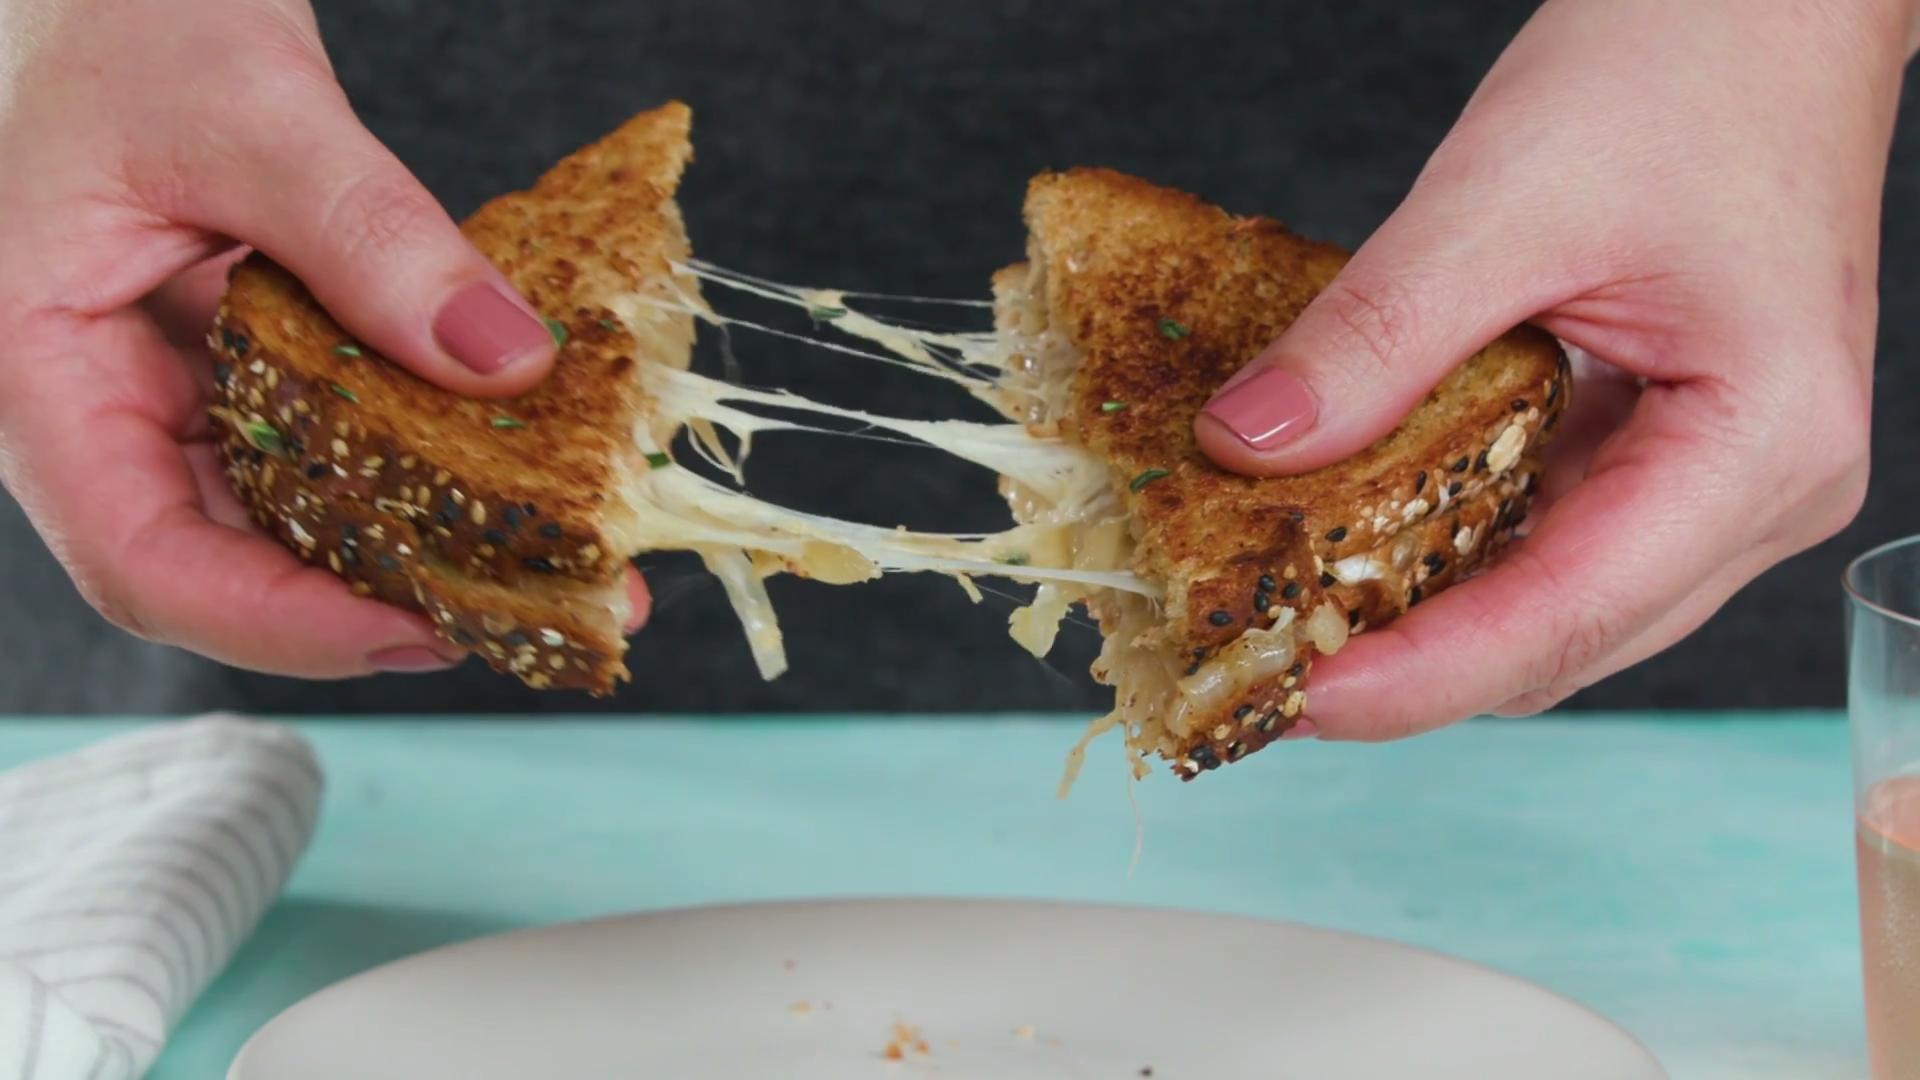 How to Make French Onion Grilled Cheese